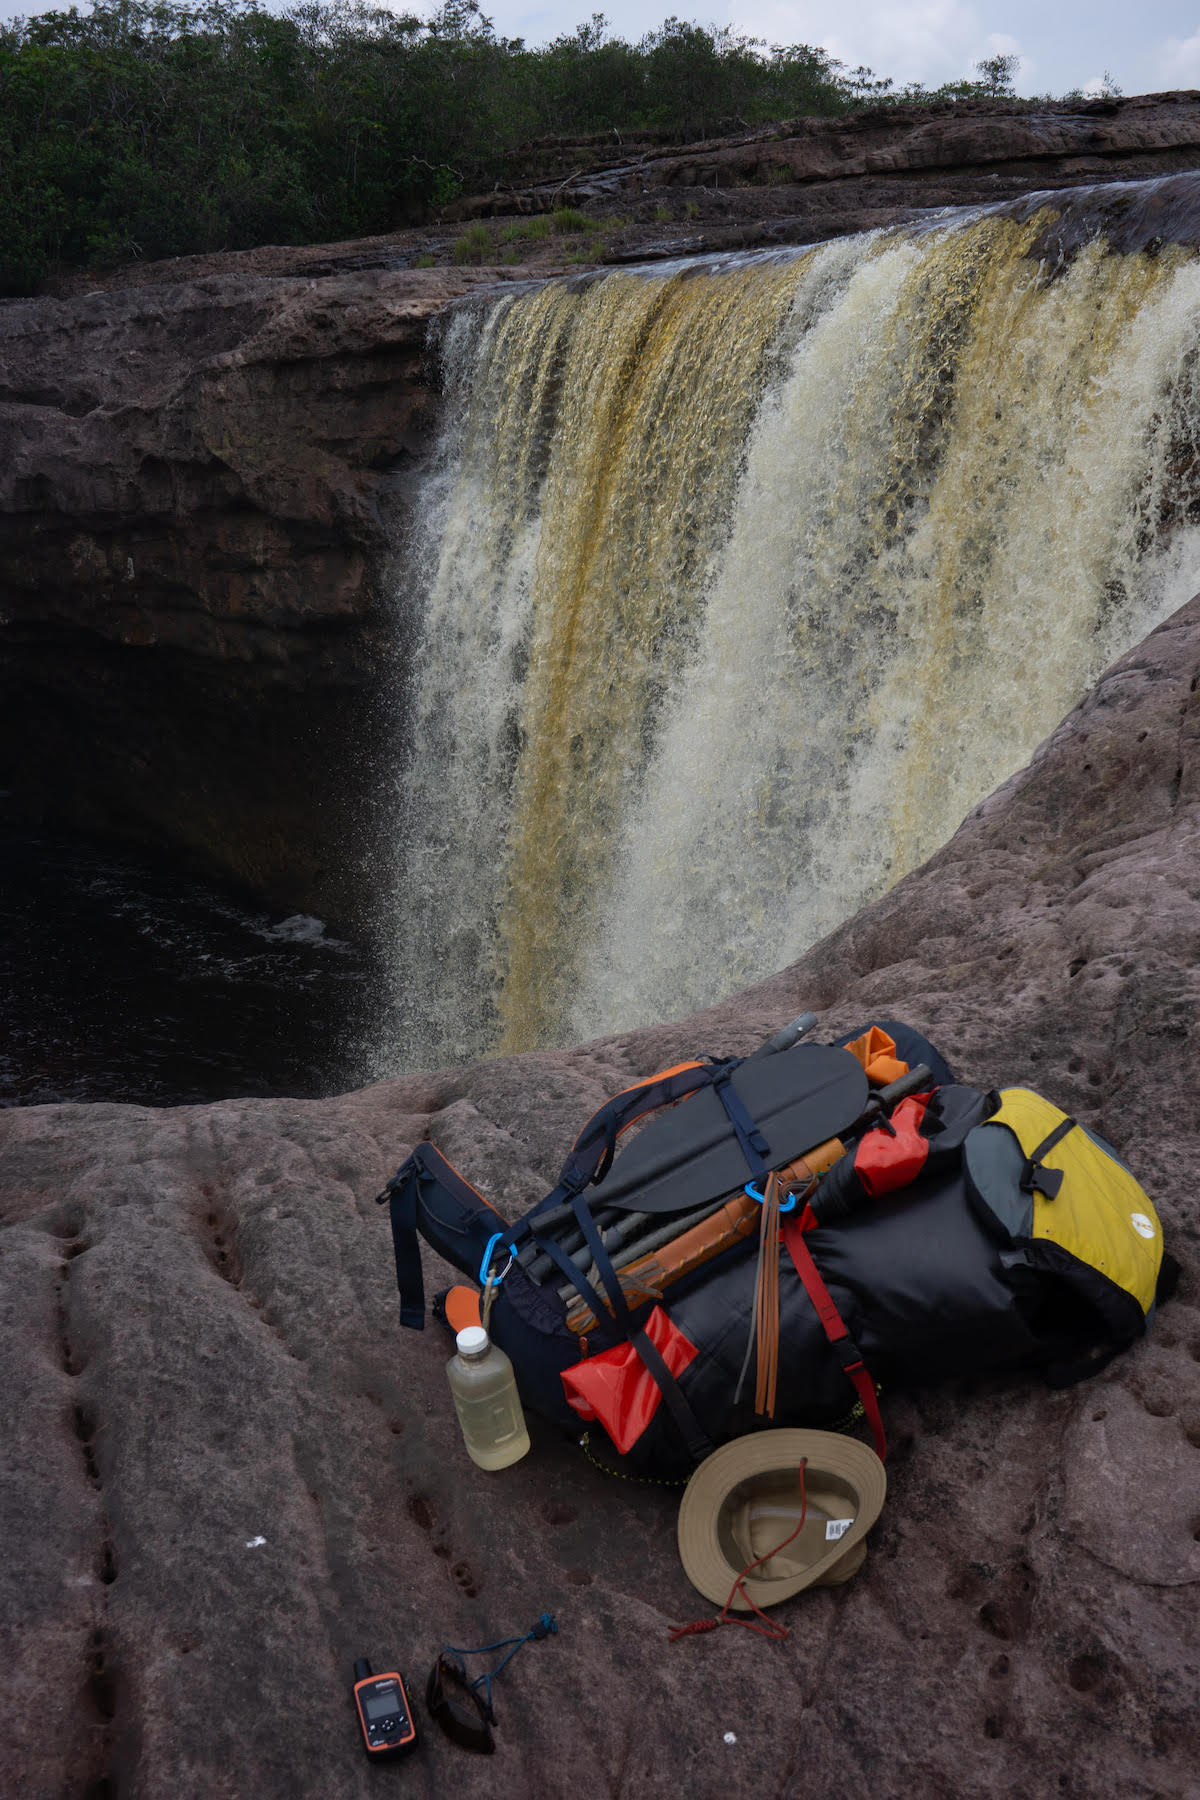 The external straps and daisy chains on the Mutant pack allowed it to carry paddles, machete, and a rolled-up two person pack-raft in the Colombian Amazon. [Photo] Drew Thayer